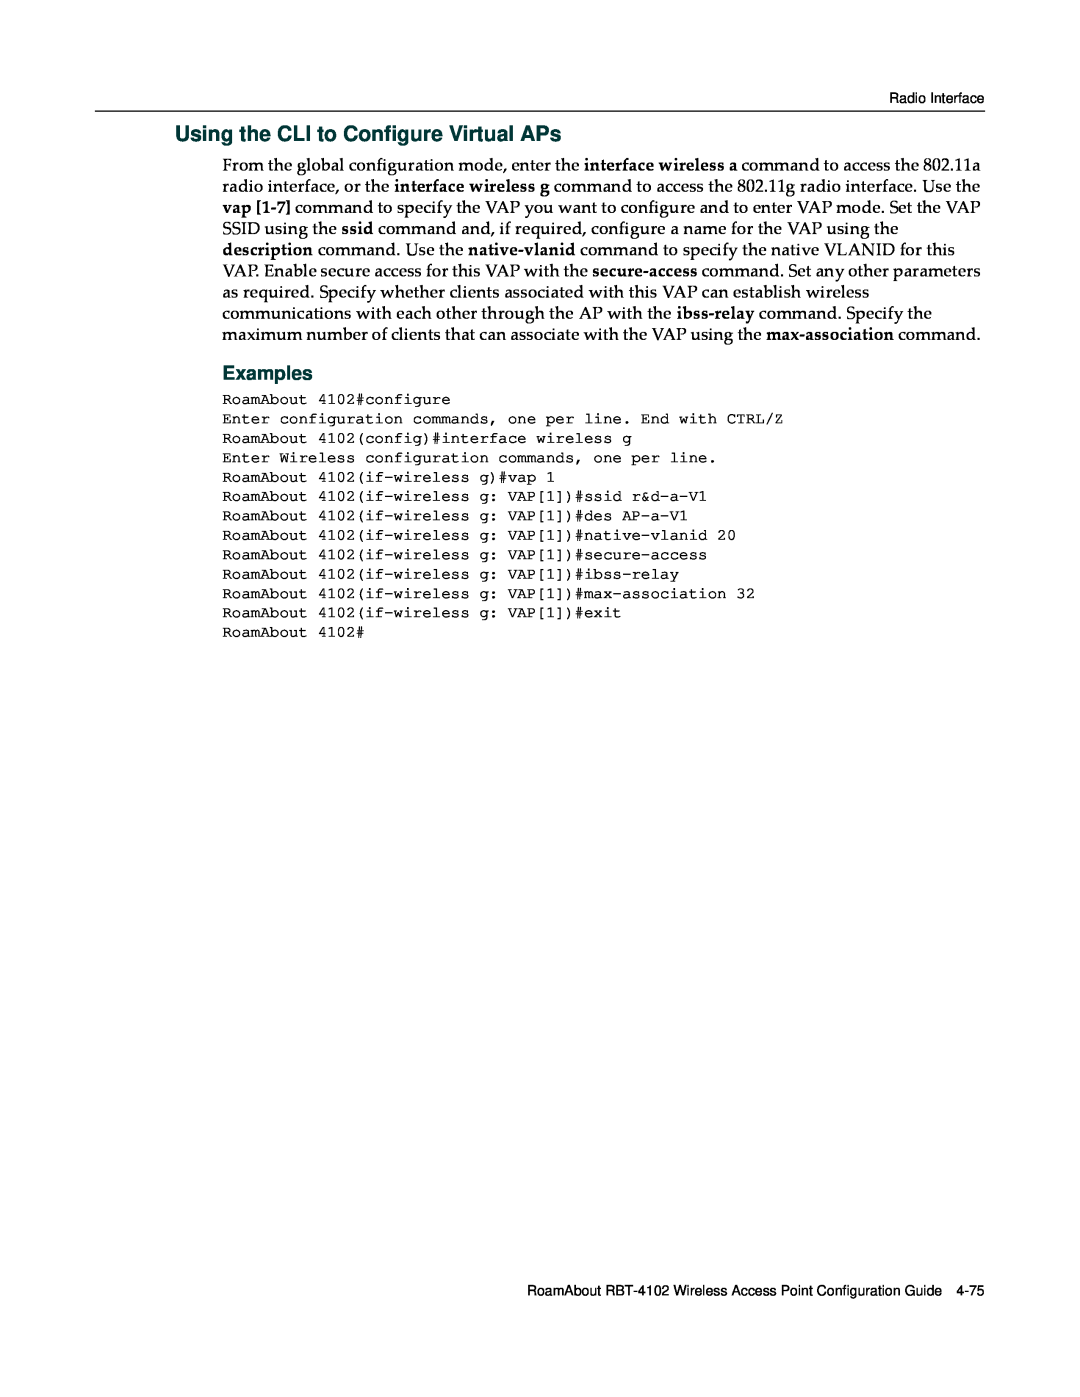 Enterasys Networks RBT-4102 manual Using the CLI to Configure Virtual APs, Examples 